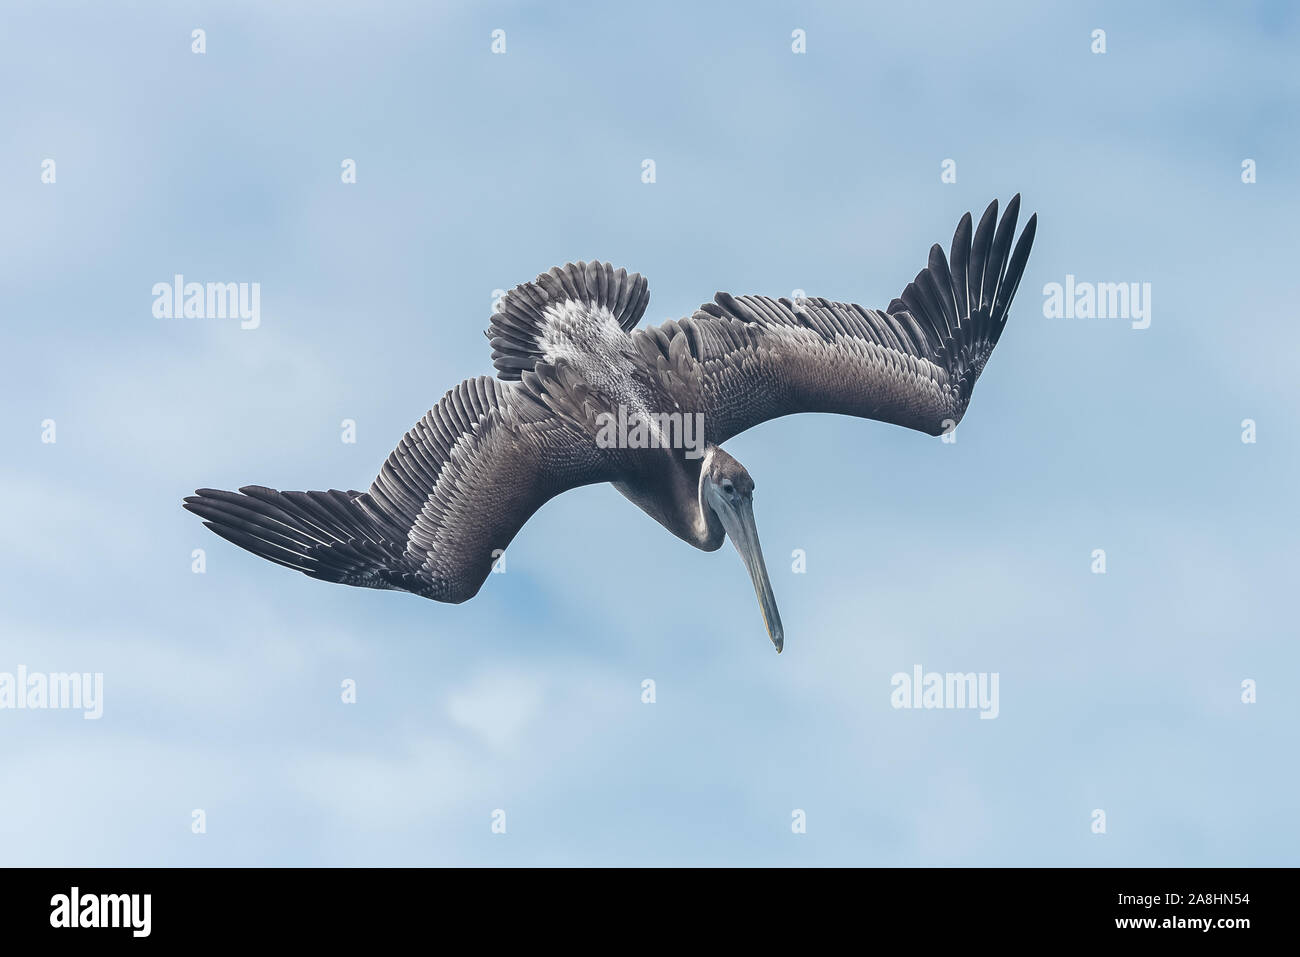 Brown striped flight feathers - Stock Image - C051/8324 - Science Photo  Library